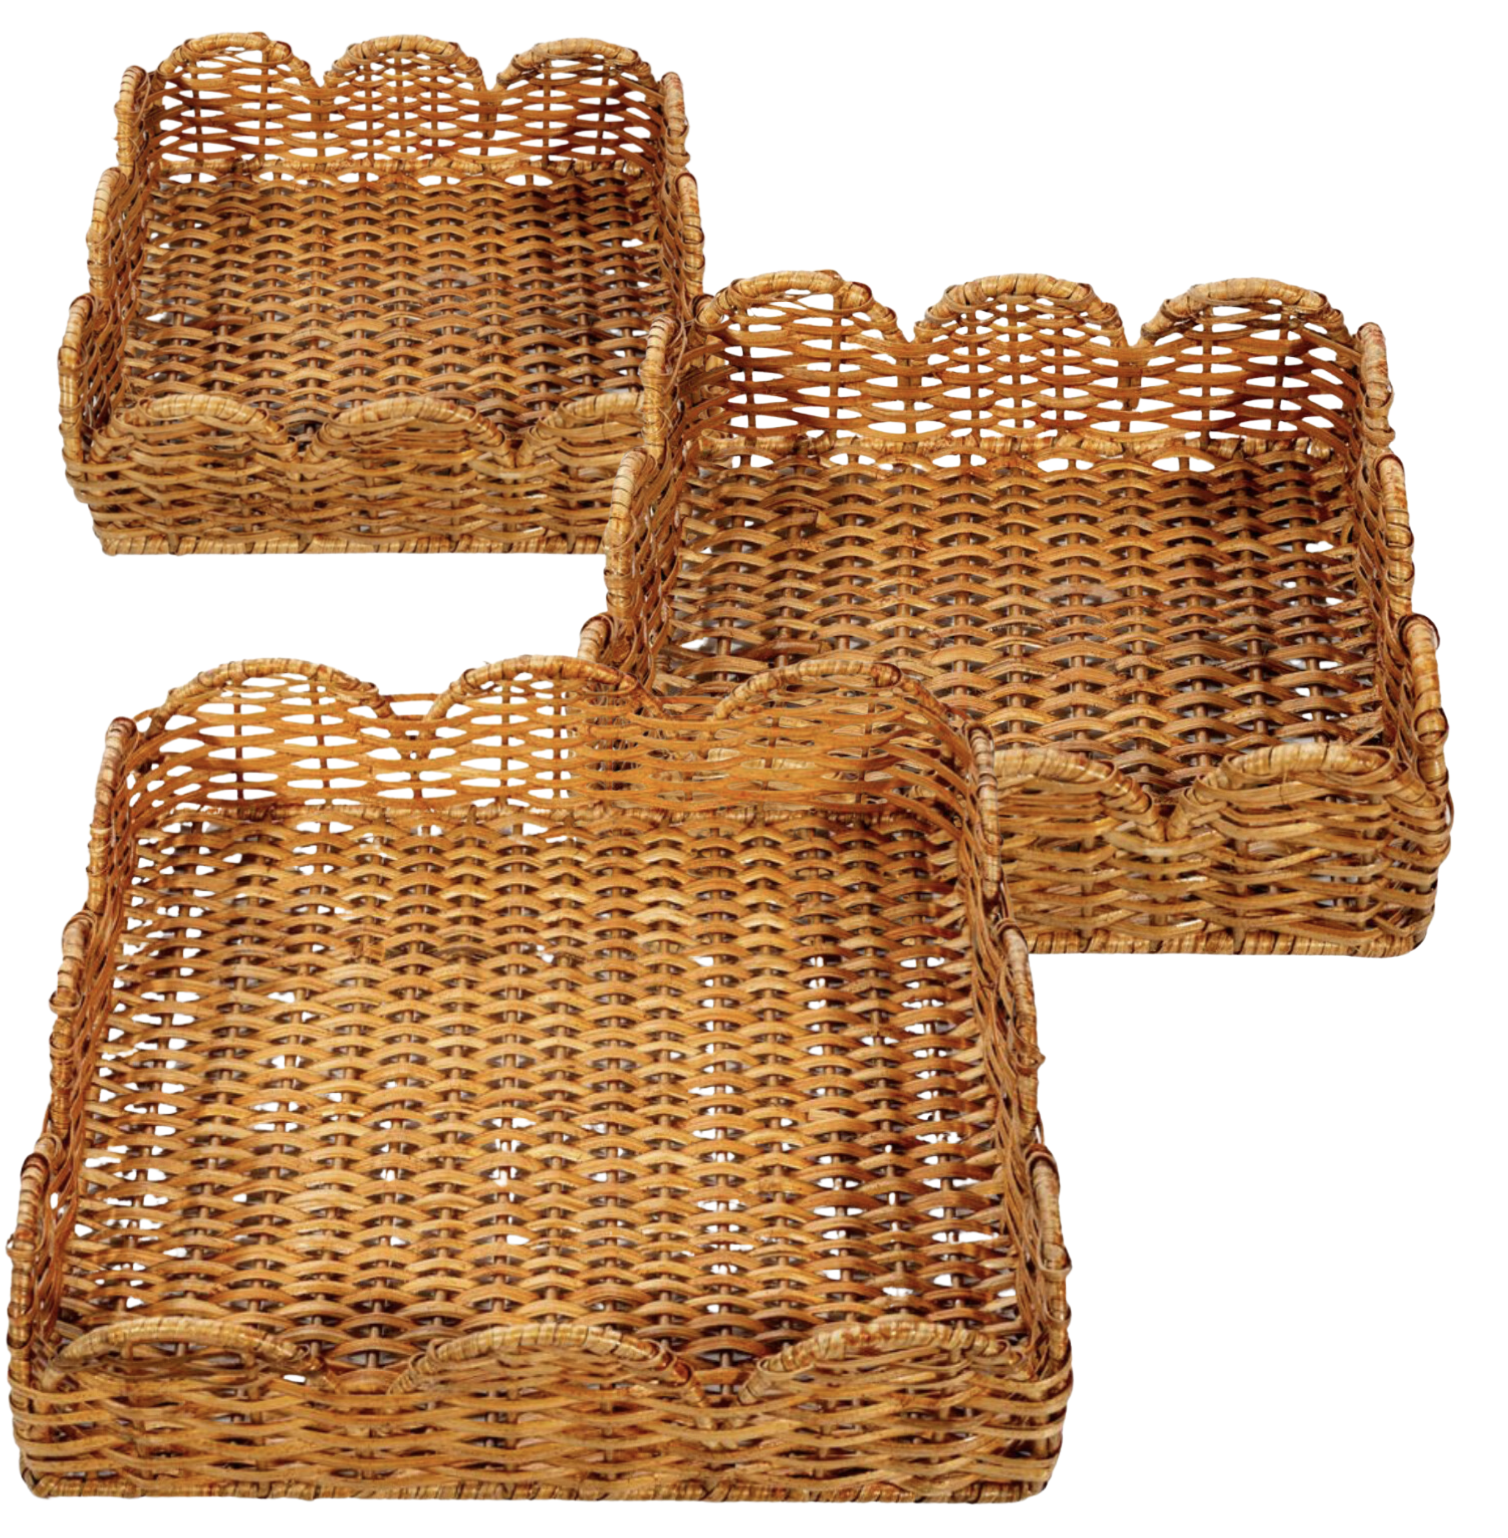 Gorgeous wicker scalloped baskets